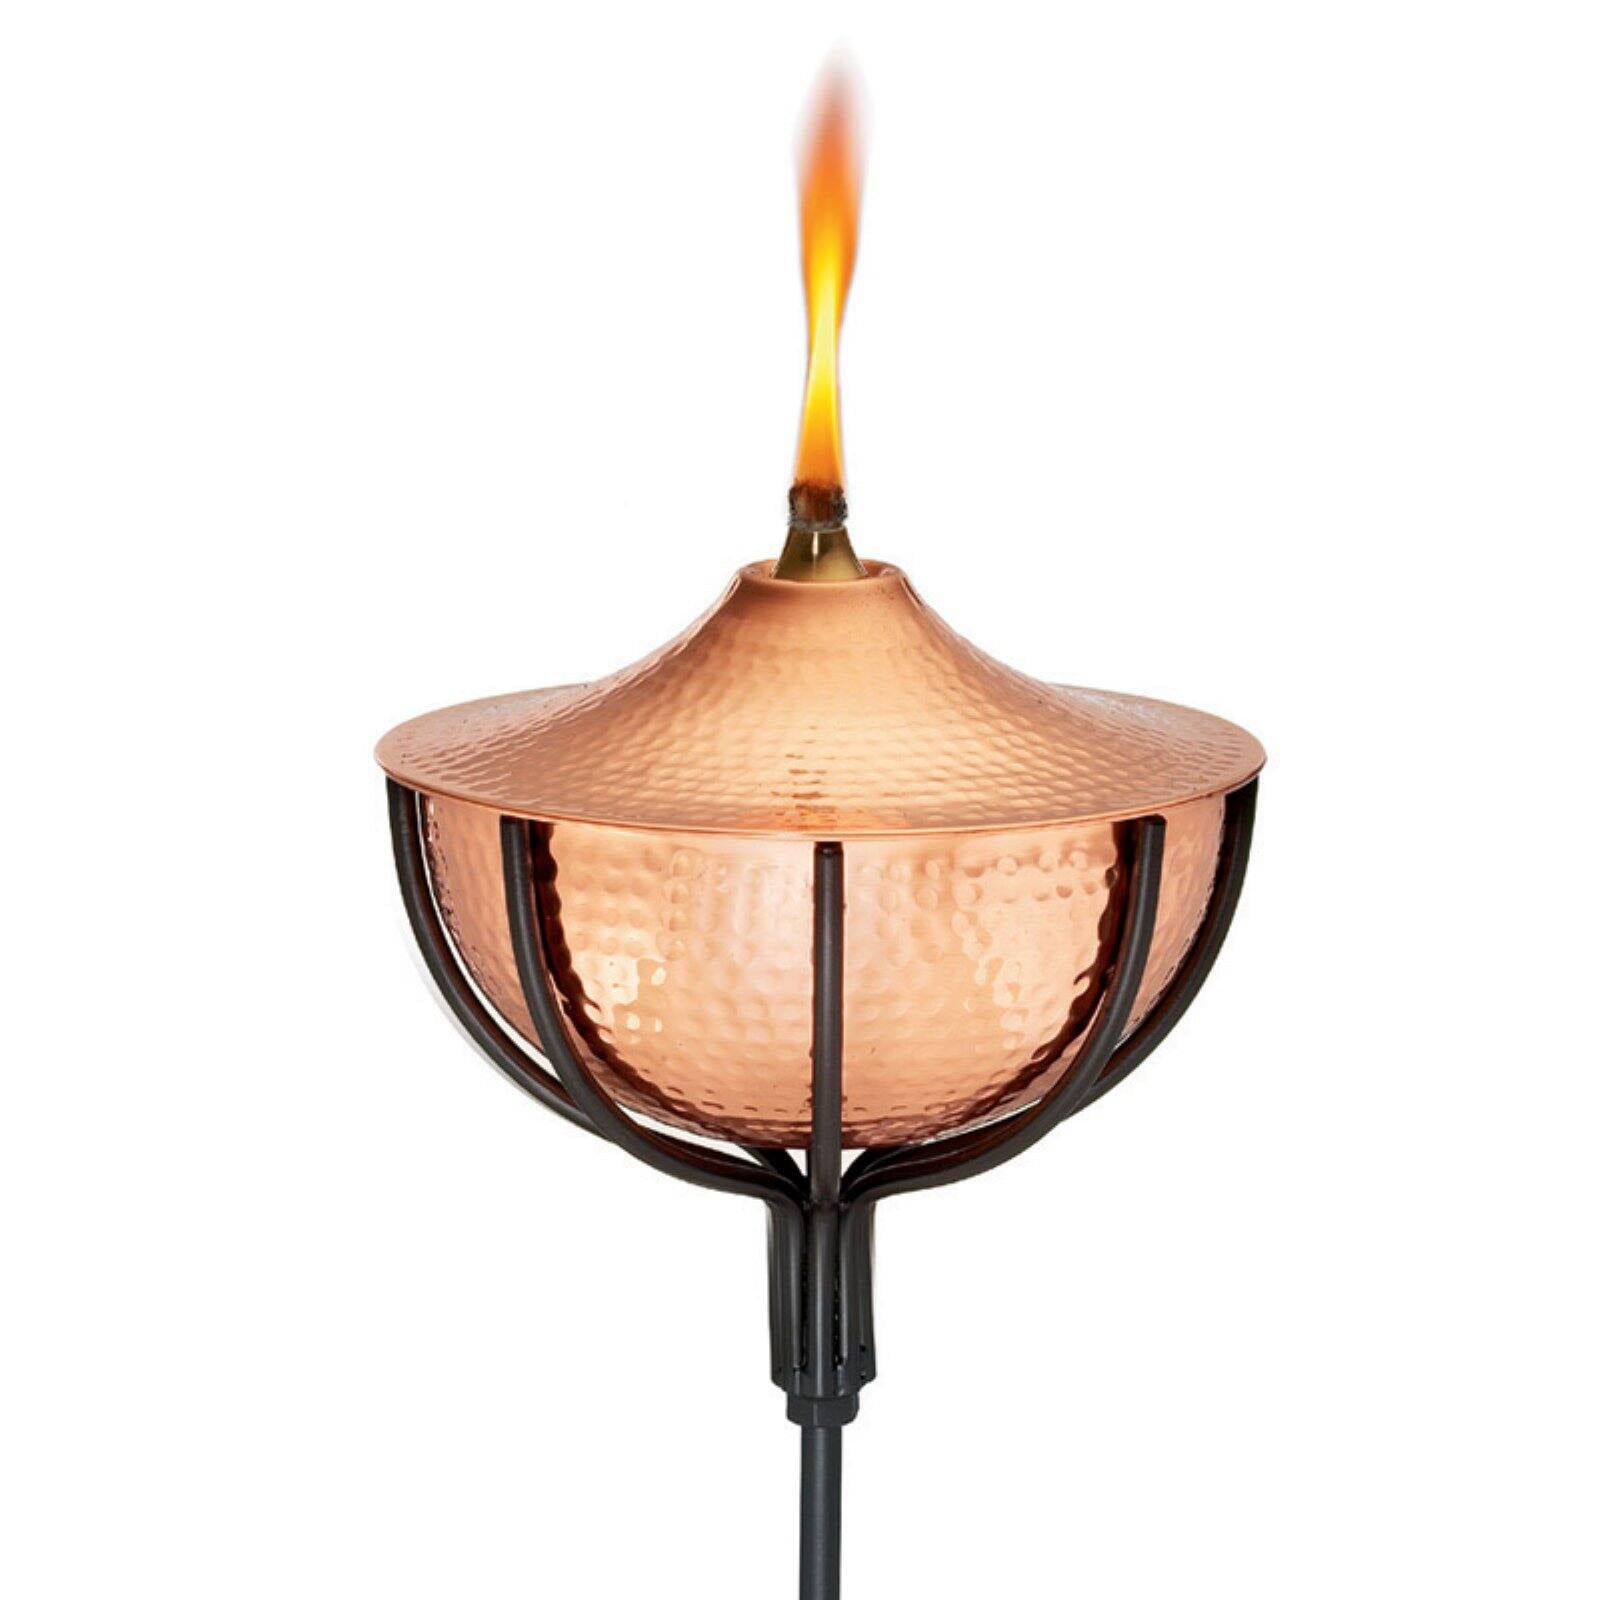 Better Homes & Garden Outdoor Tabletop Copper Bowl Torch Decorative Torch Includes Snuffer Long-Lasting Fiberglass Wick